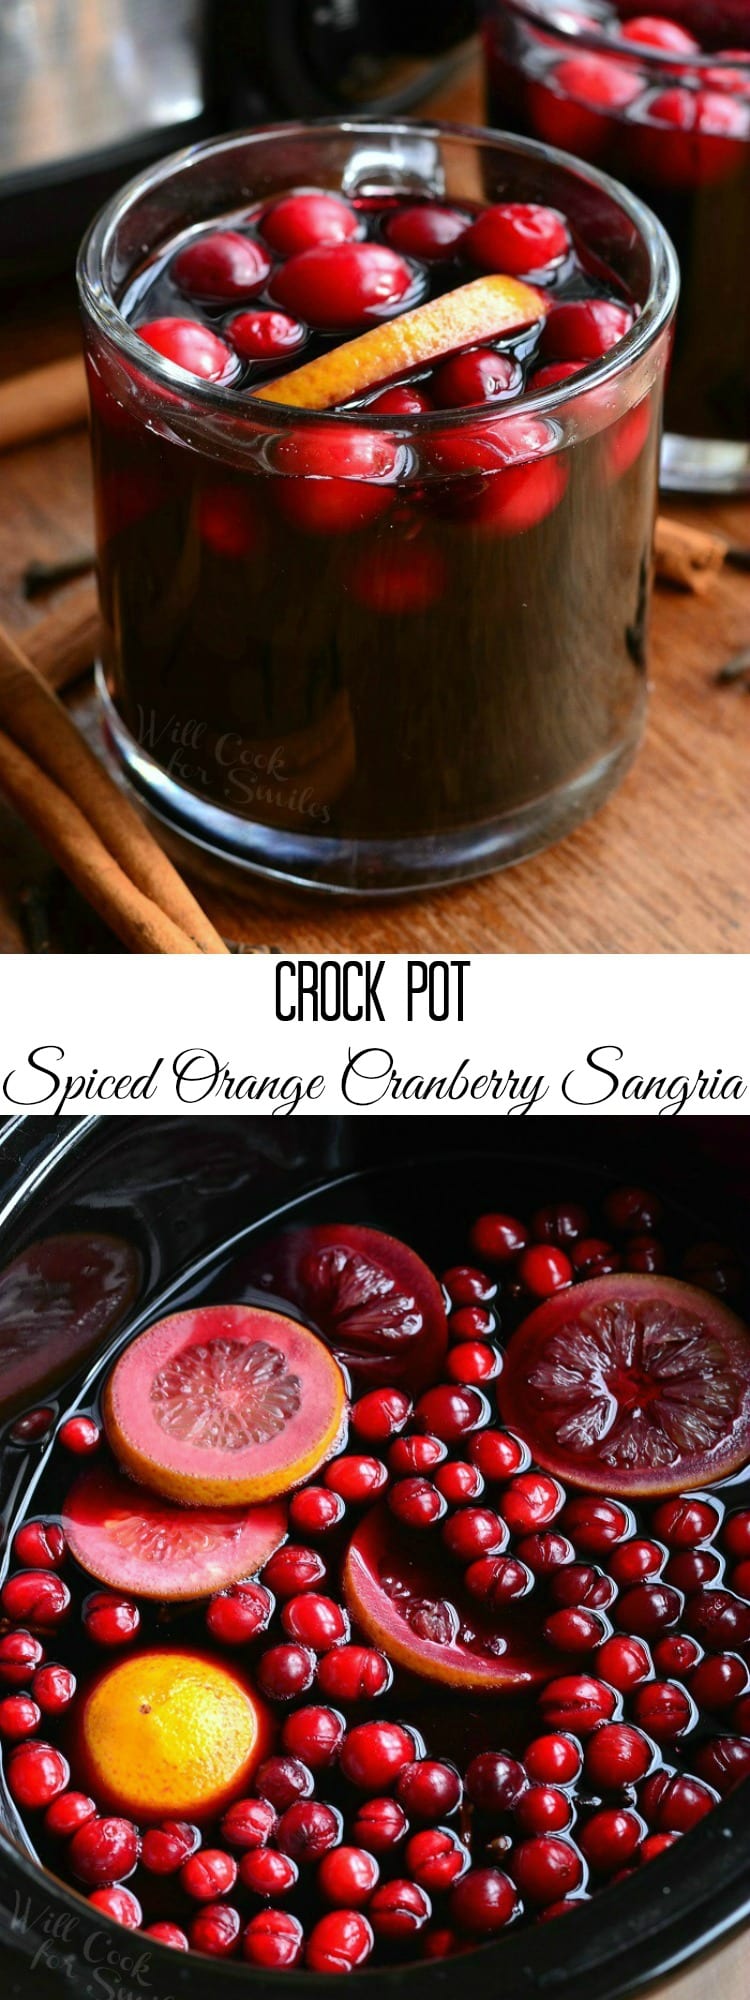 holding Orange Cranberry Sangria in a glass mug with orange and cranberries inside 